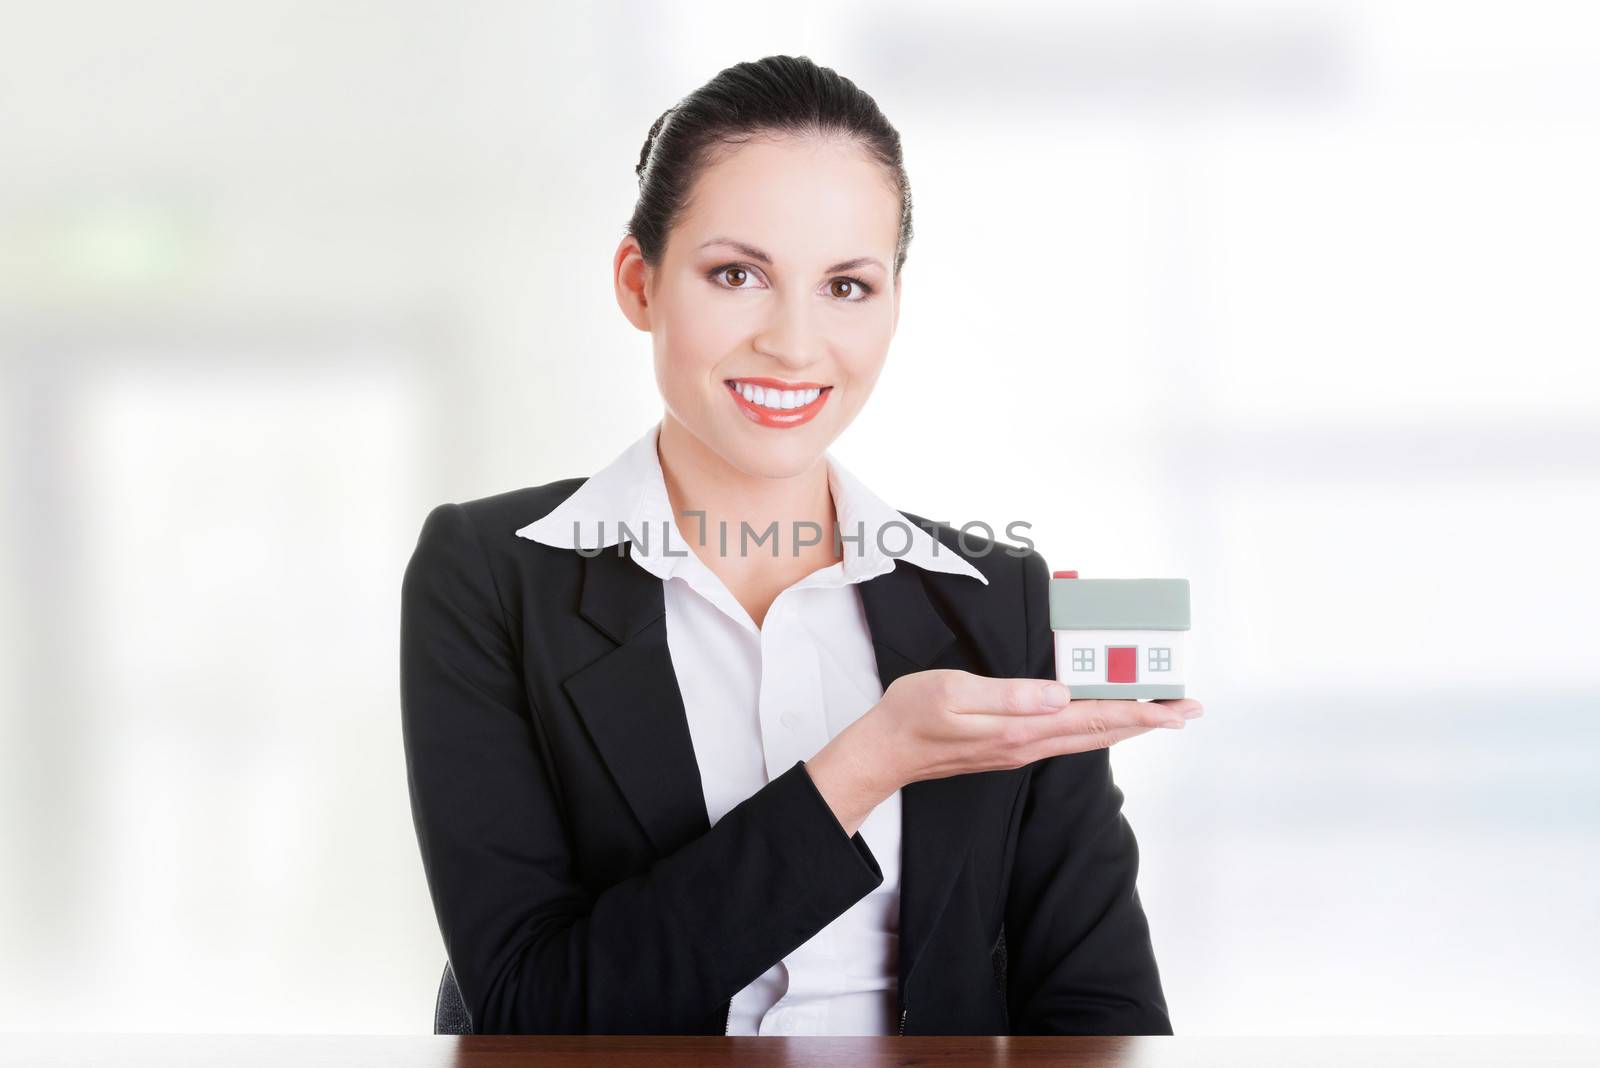 Businesswoman with house model over white - real estate loan or insurance concept